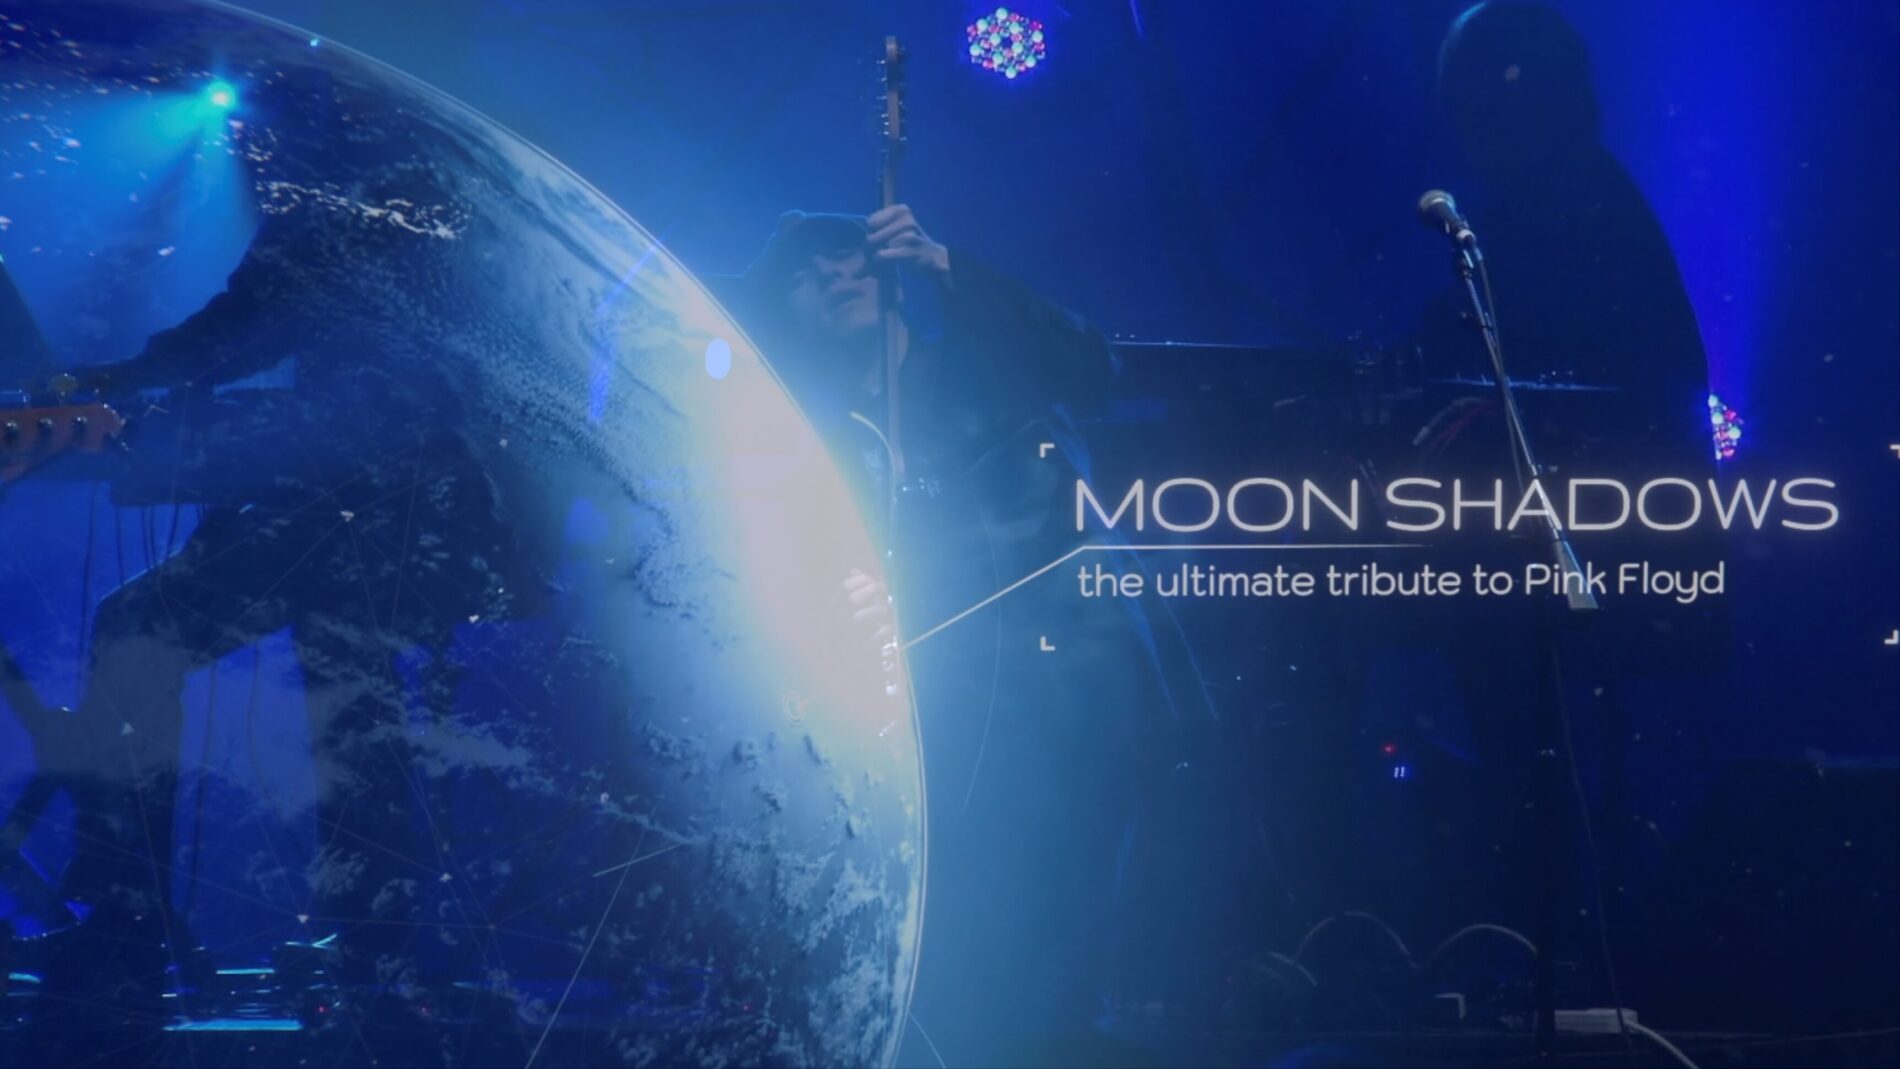 MOON SHADOWS: the ultimate tribute to Pink Floyd